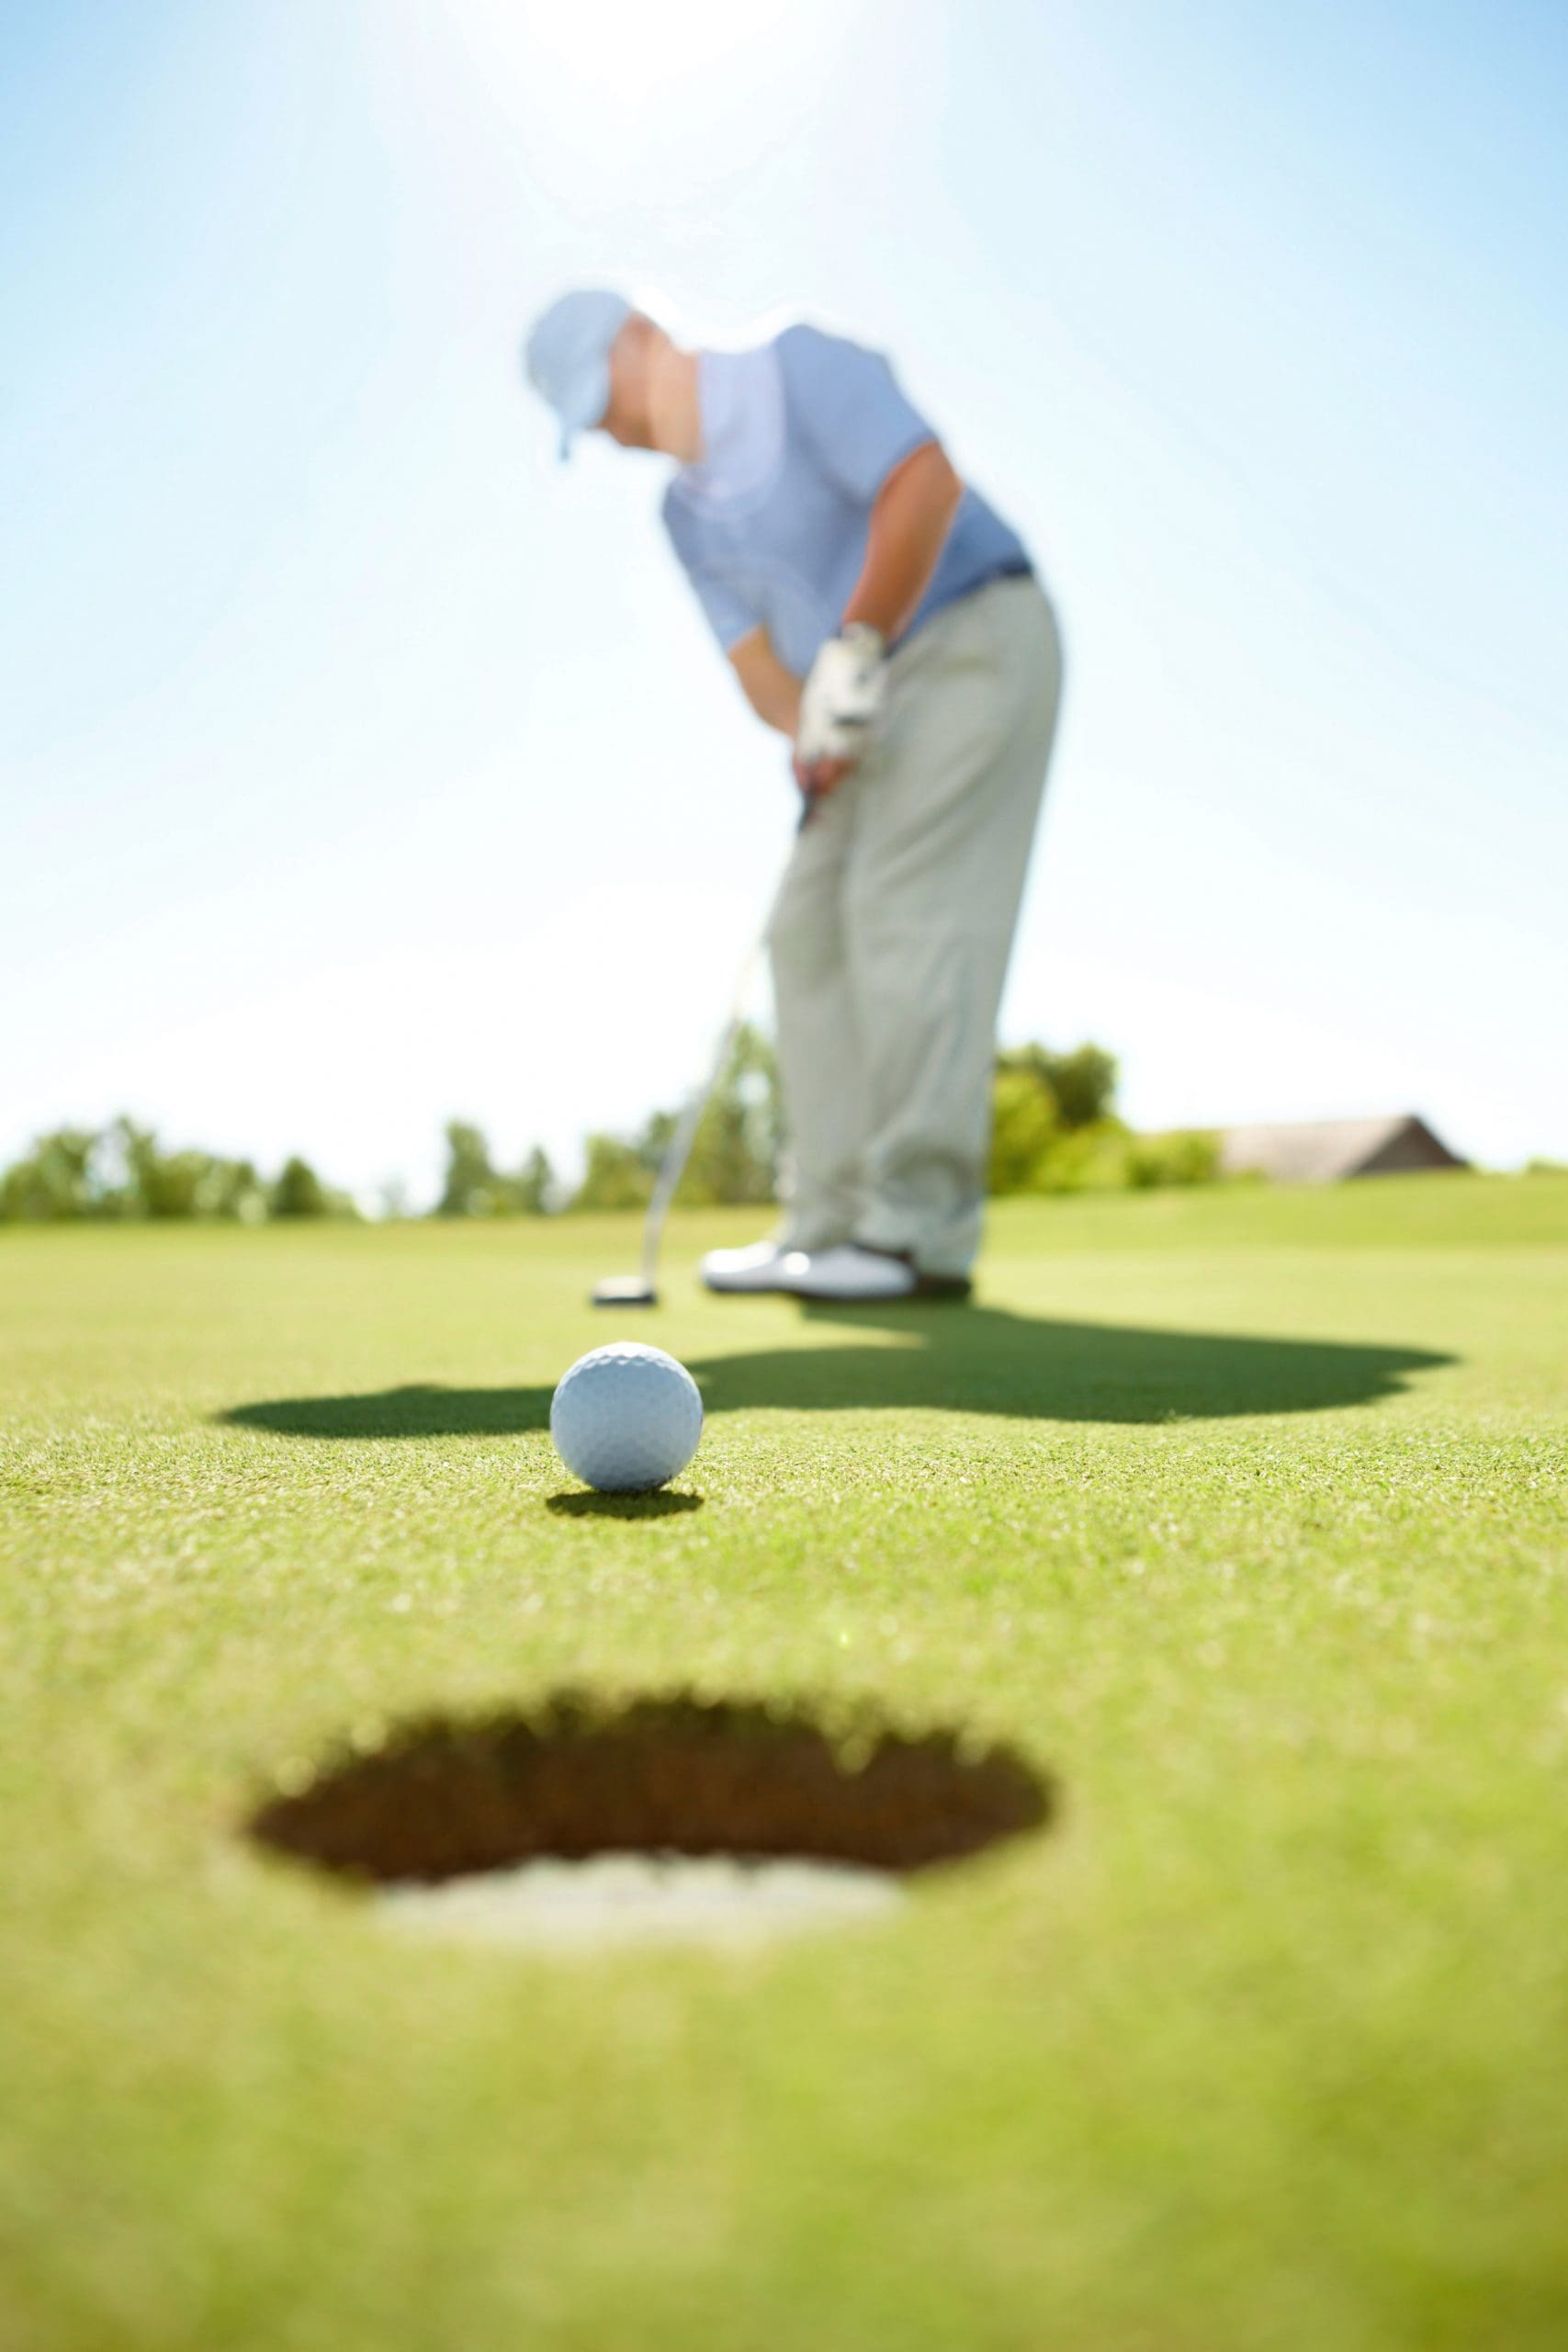 A senior golfer watches his golf ball head for the hole on the putting green